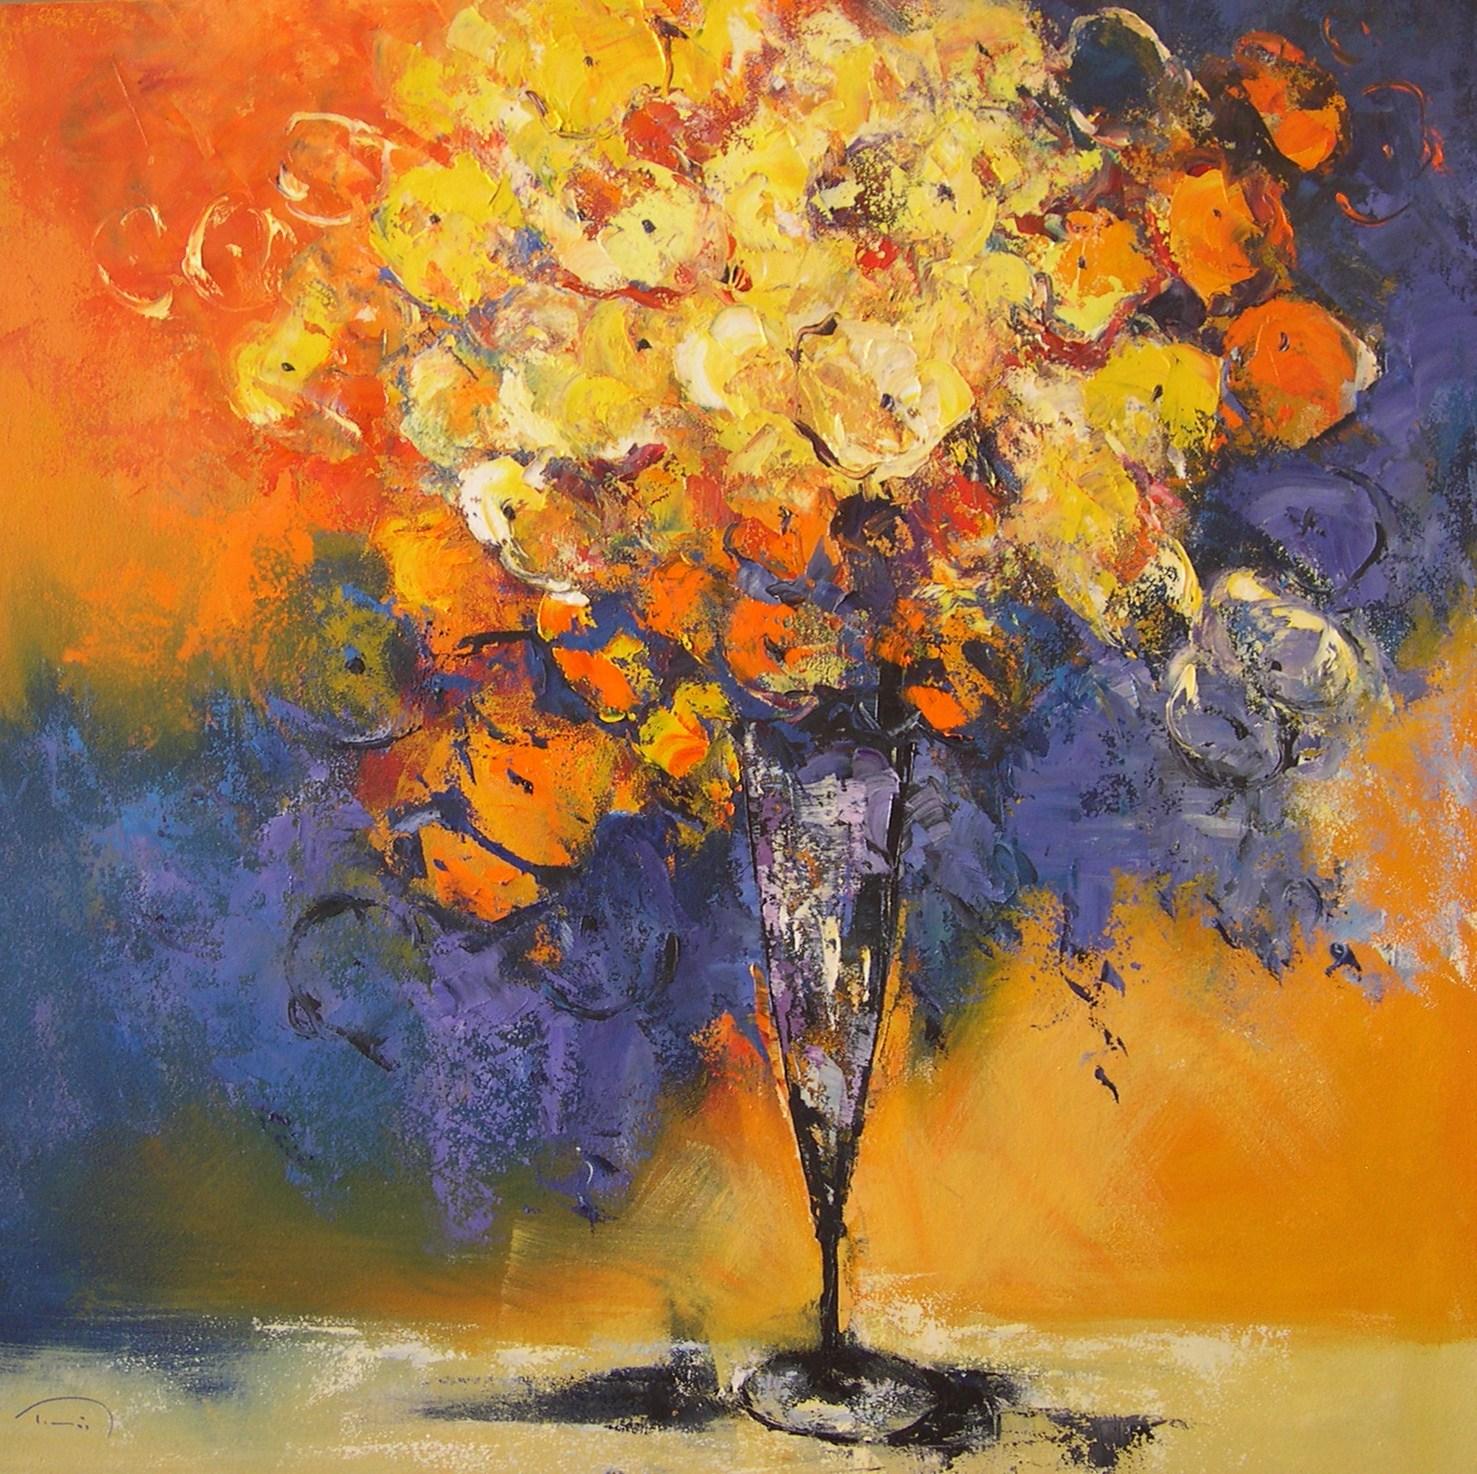 Esquitxos - 21st Century, Contemporary, Still Life Oil Painting, Canvas, Flowers